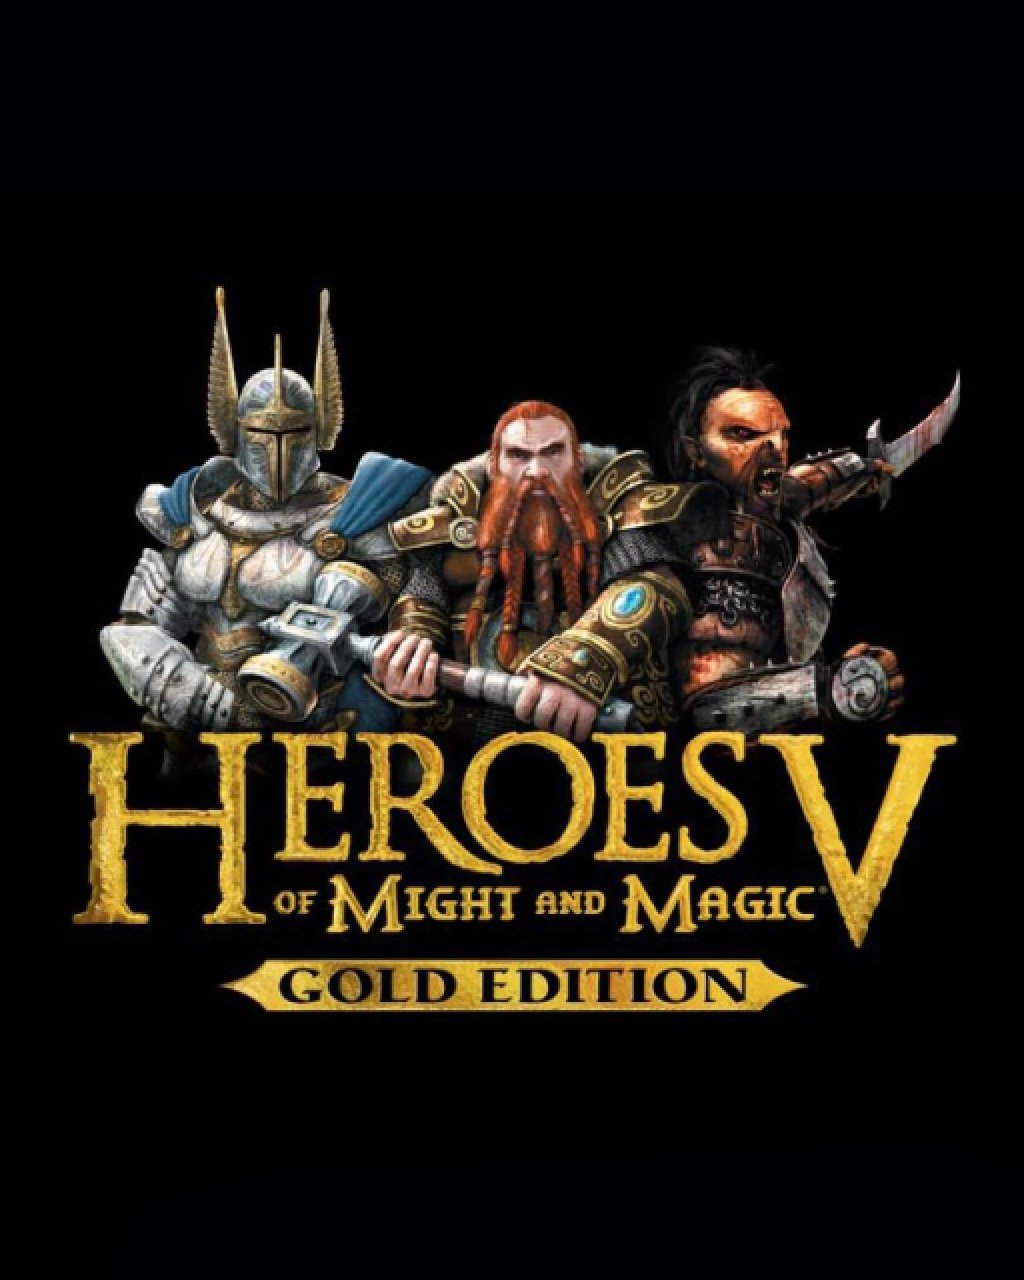 ESD Might and Magic Heroes V Gold Edition